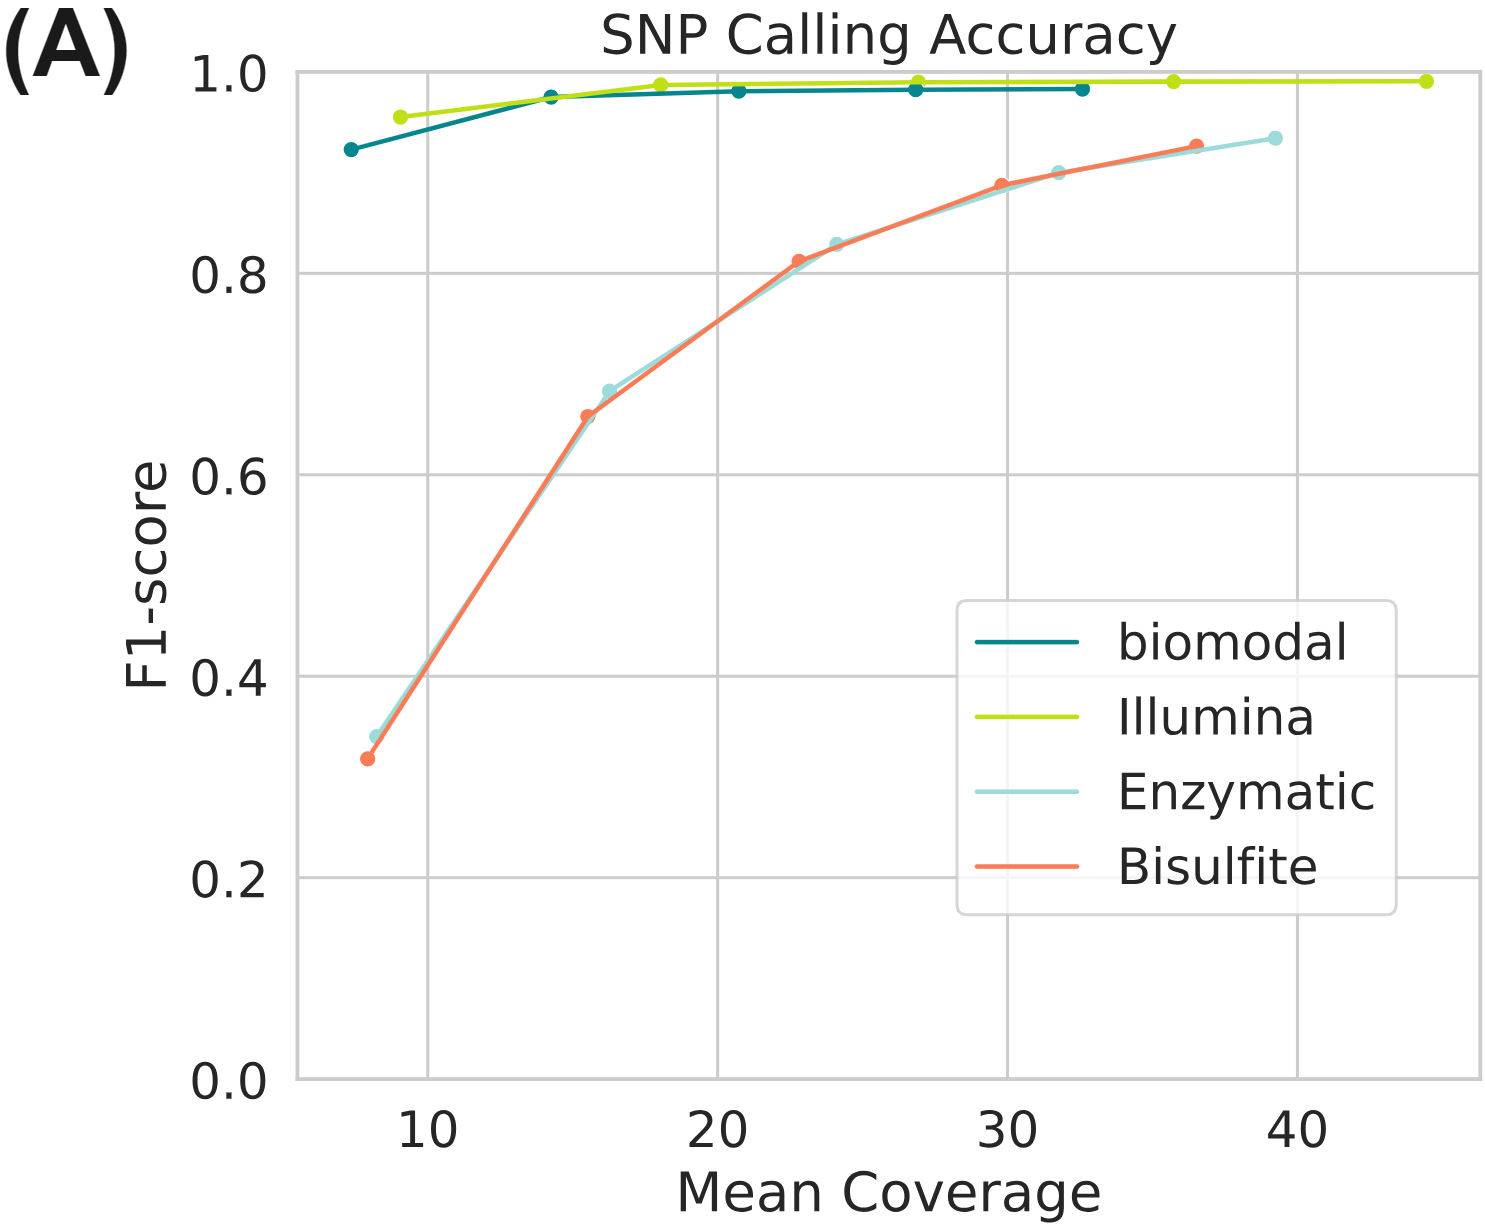 SNP calling accuracy achieved with biomodal duet vs other technologies